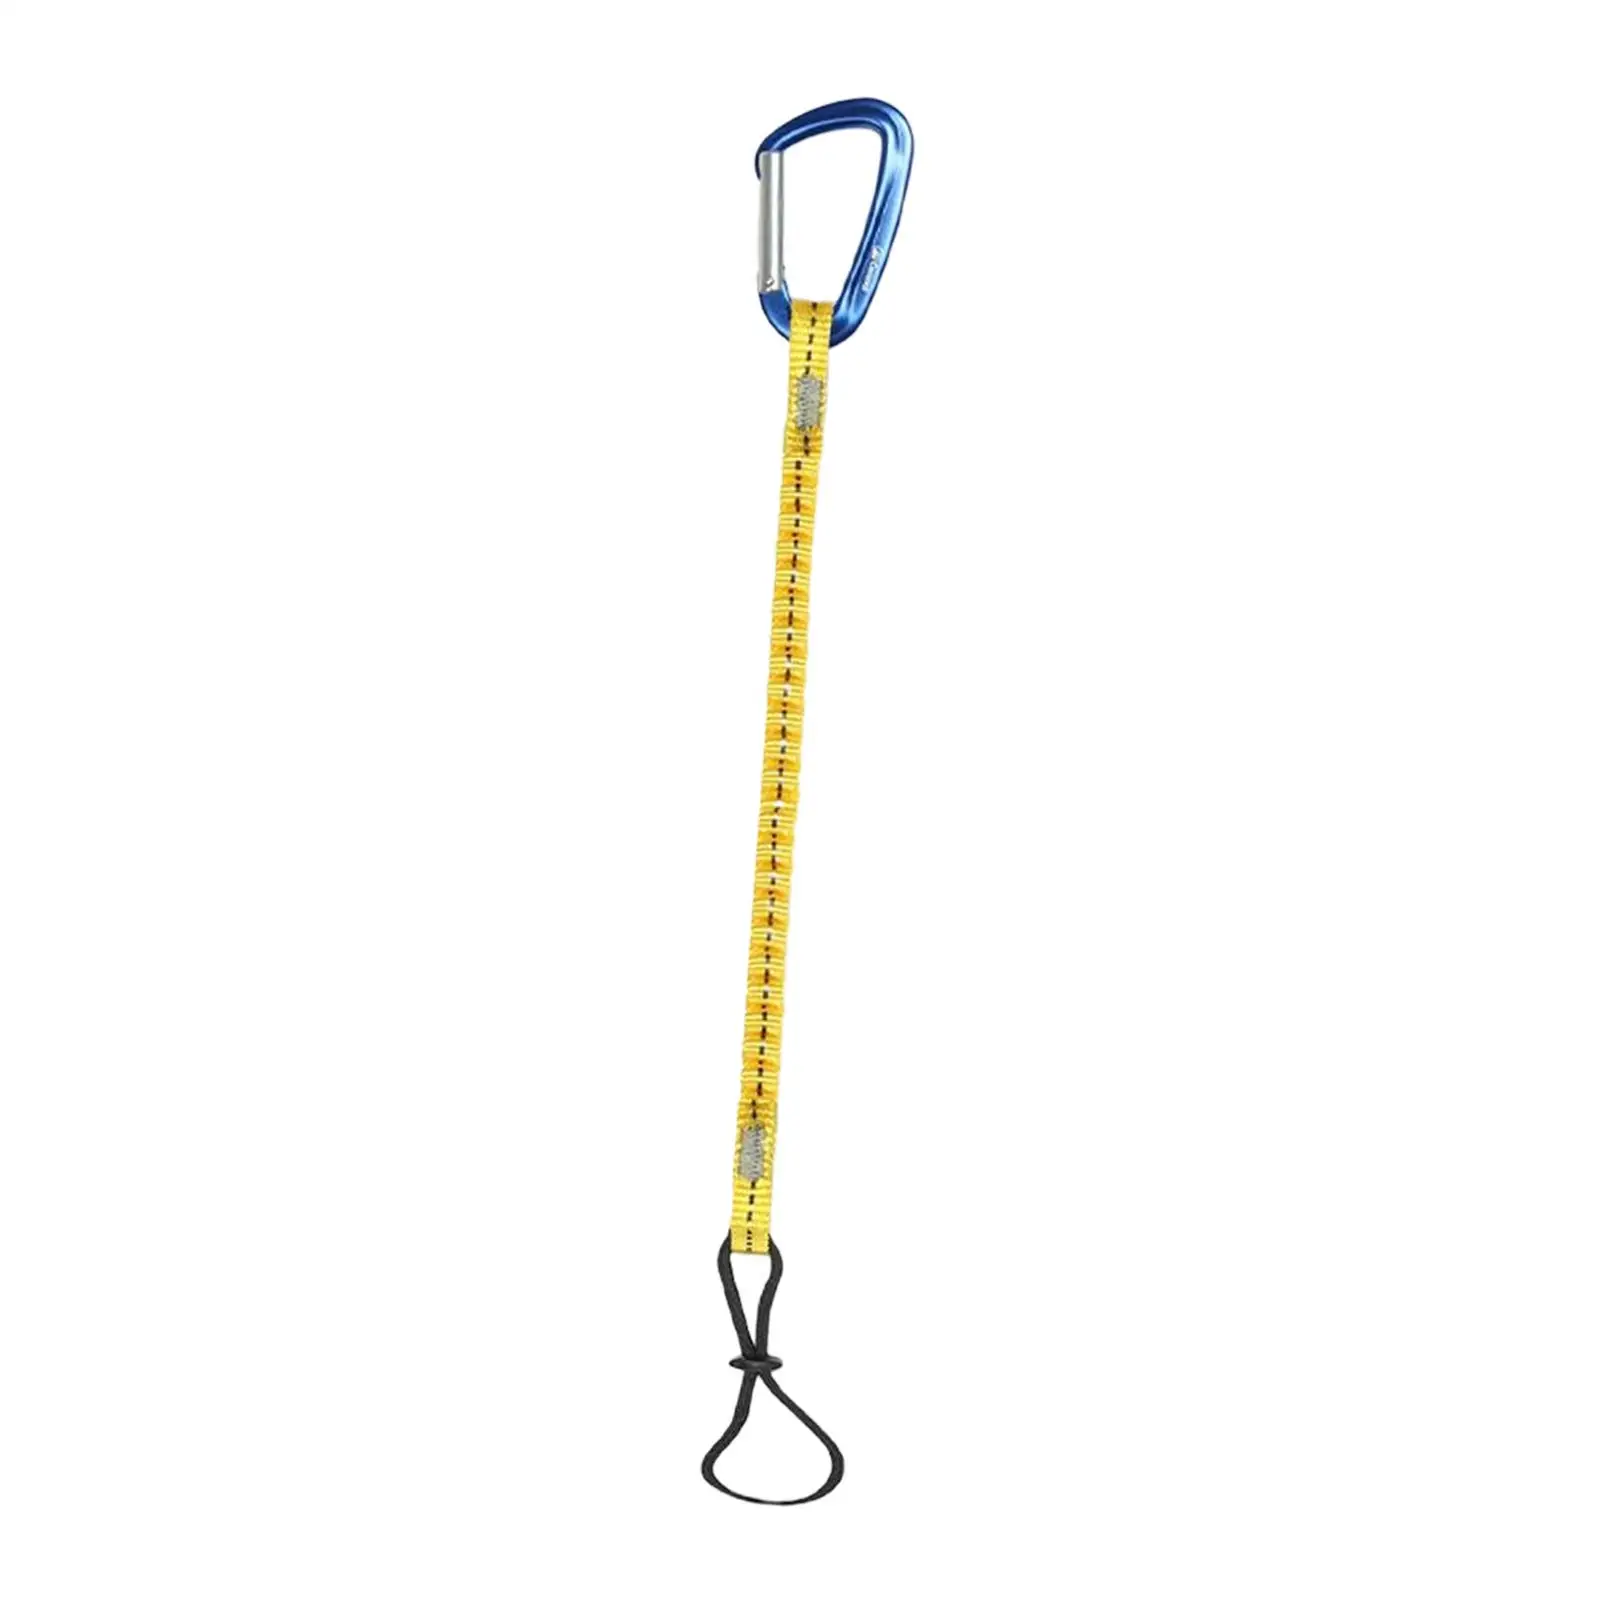 Tool Lanyard with Carabiner Attachment Retractable Elastic Rope High Strength